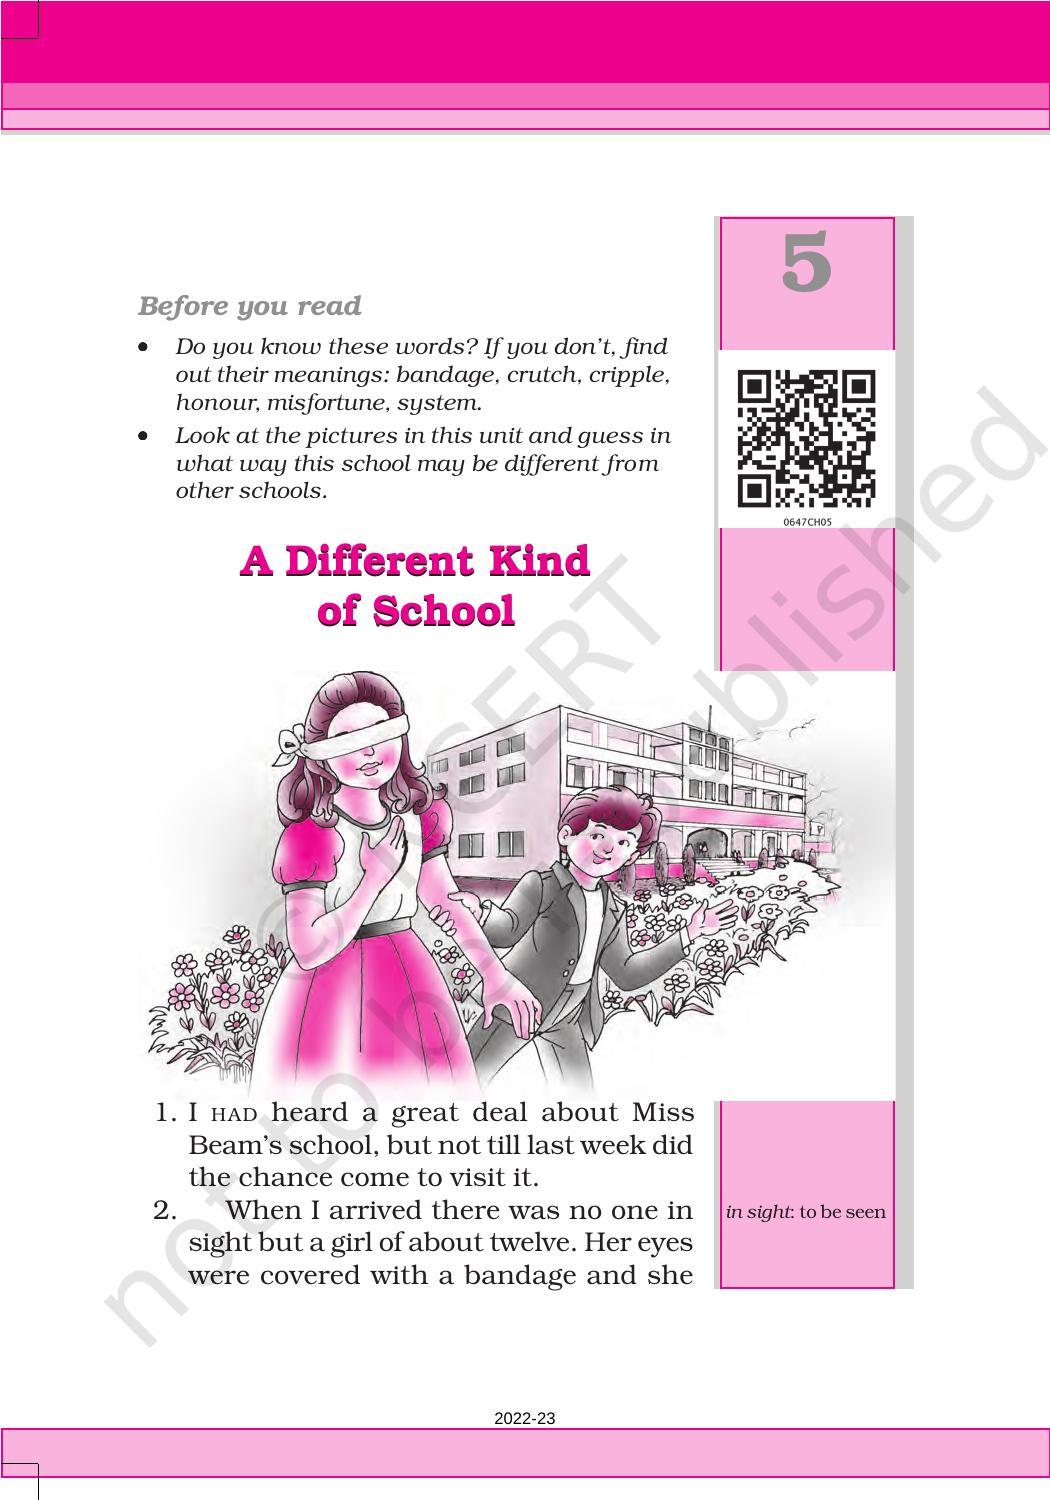 ncert-book-for-class-6-english-honeysuckle-chapter-5-a-different